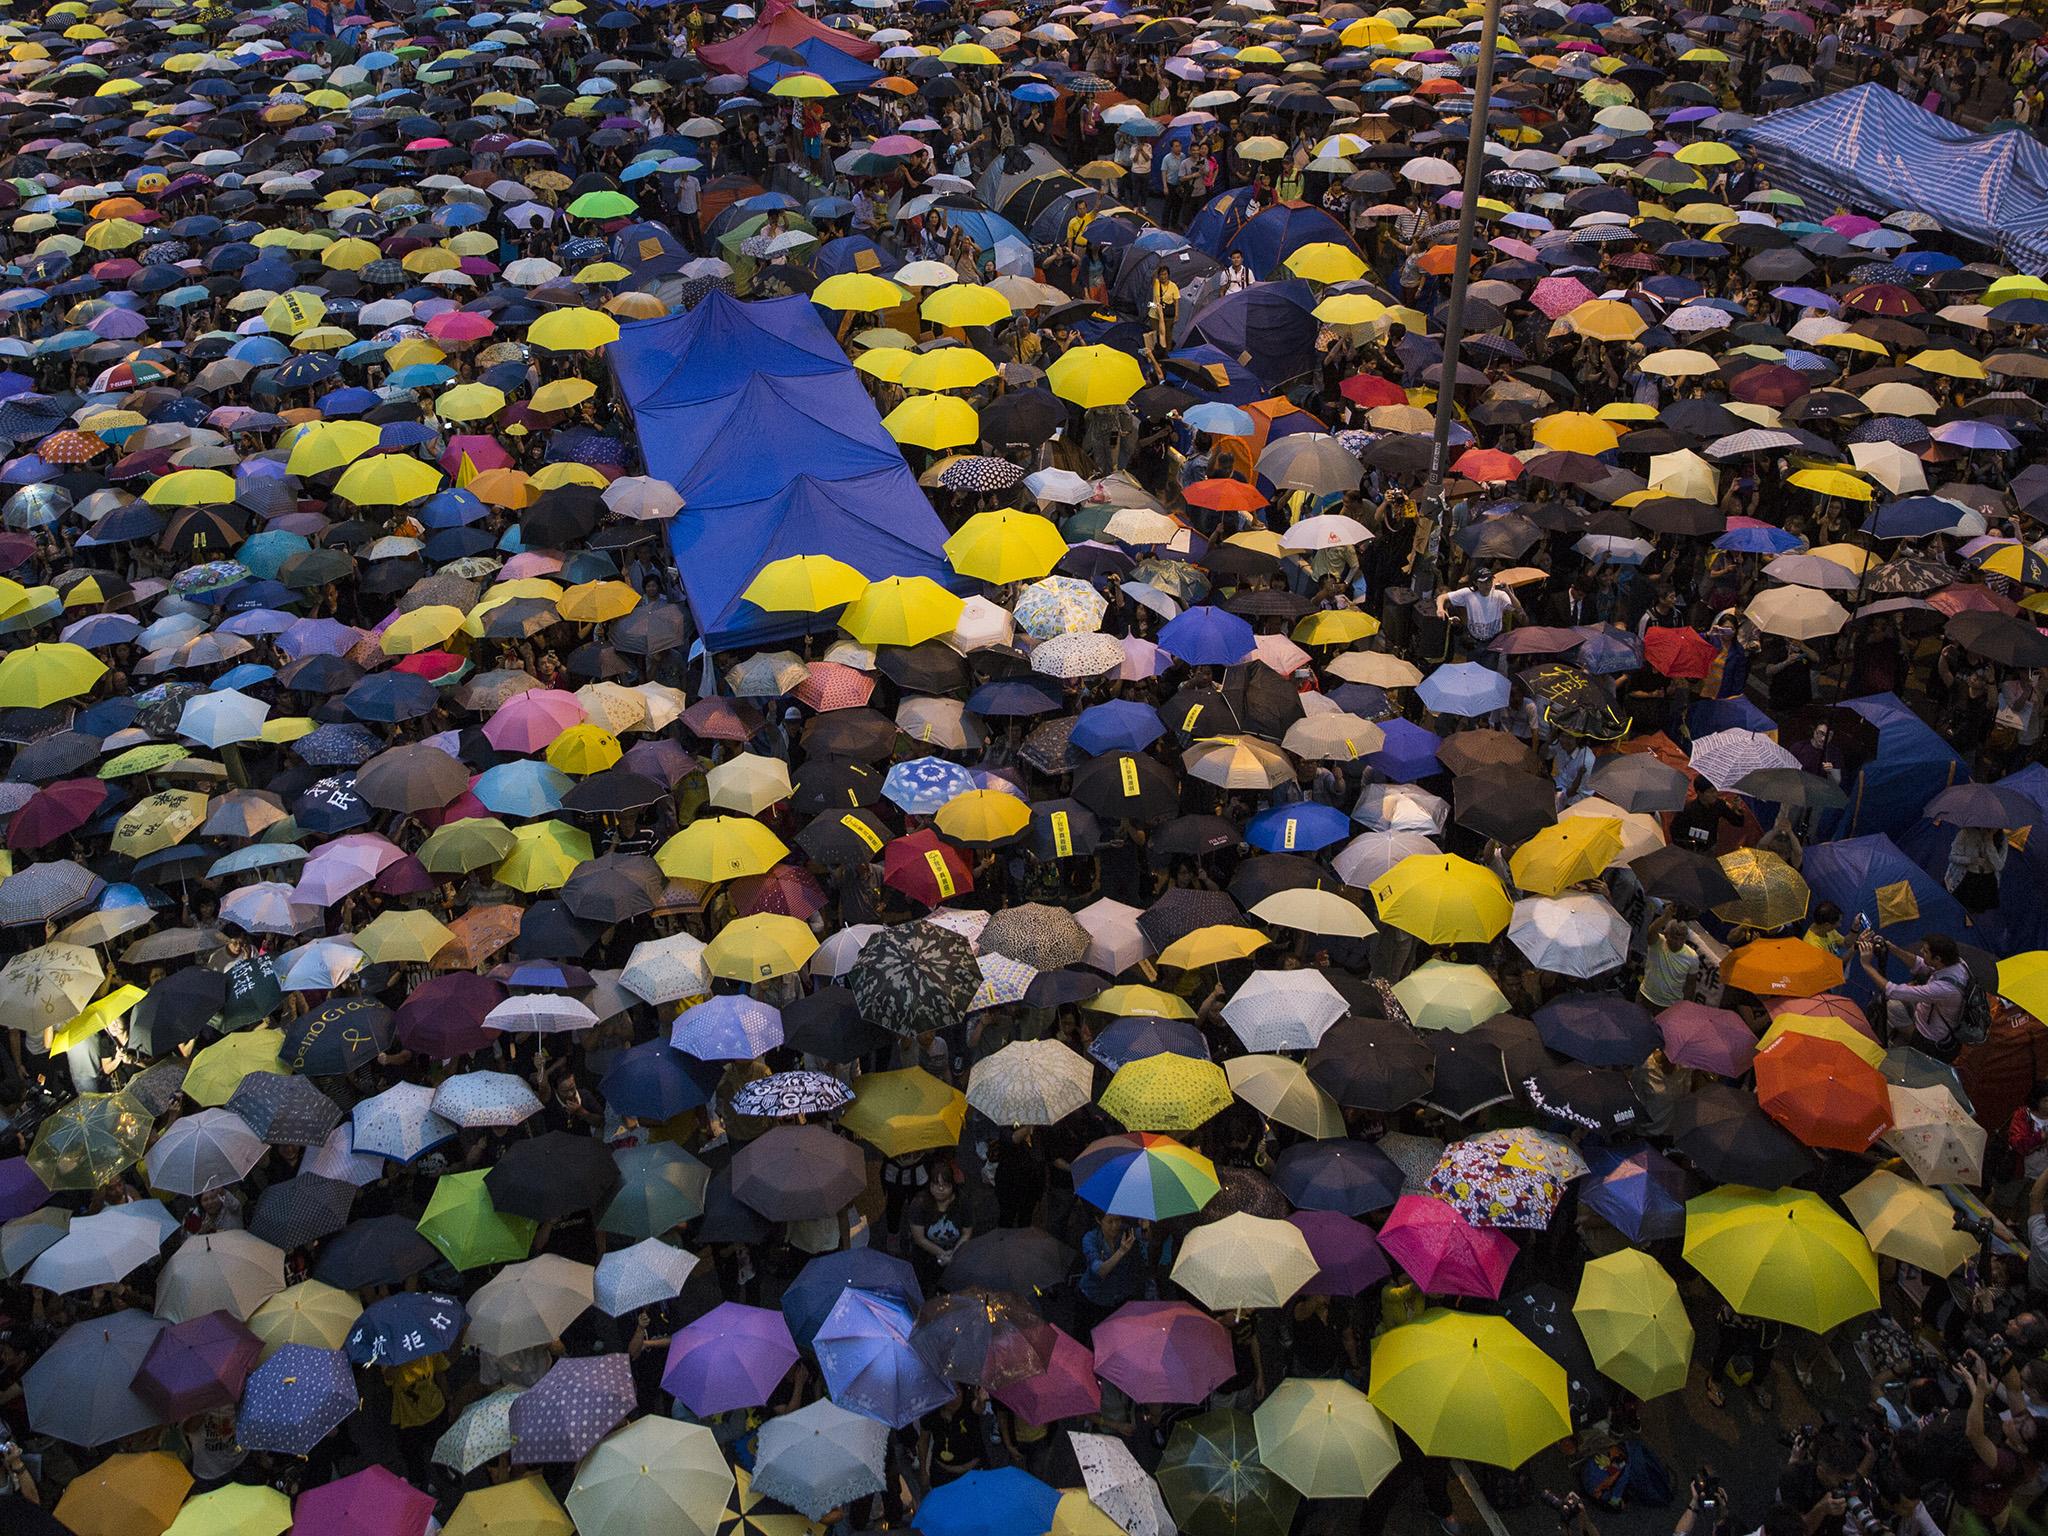 Umbrellas are opened as tens of thousands come to the main protest site one month after the Hong Kong police used tear gas to disperse protesters